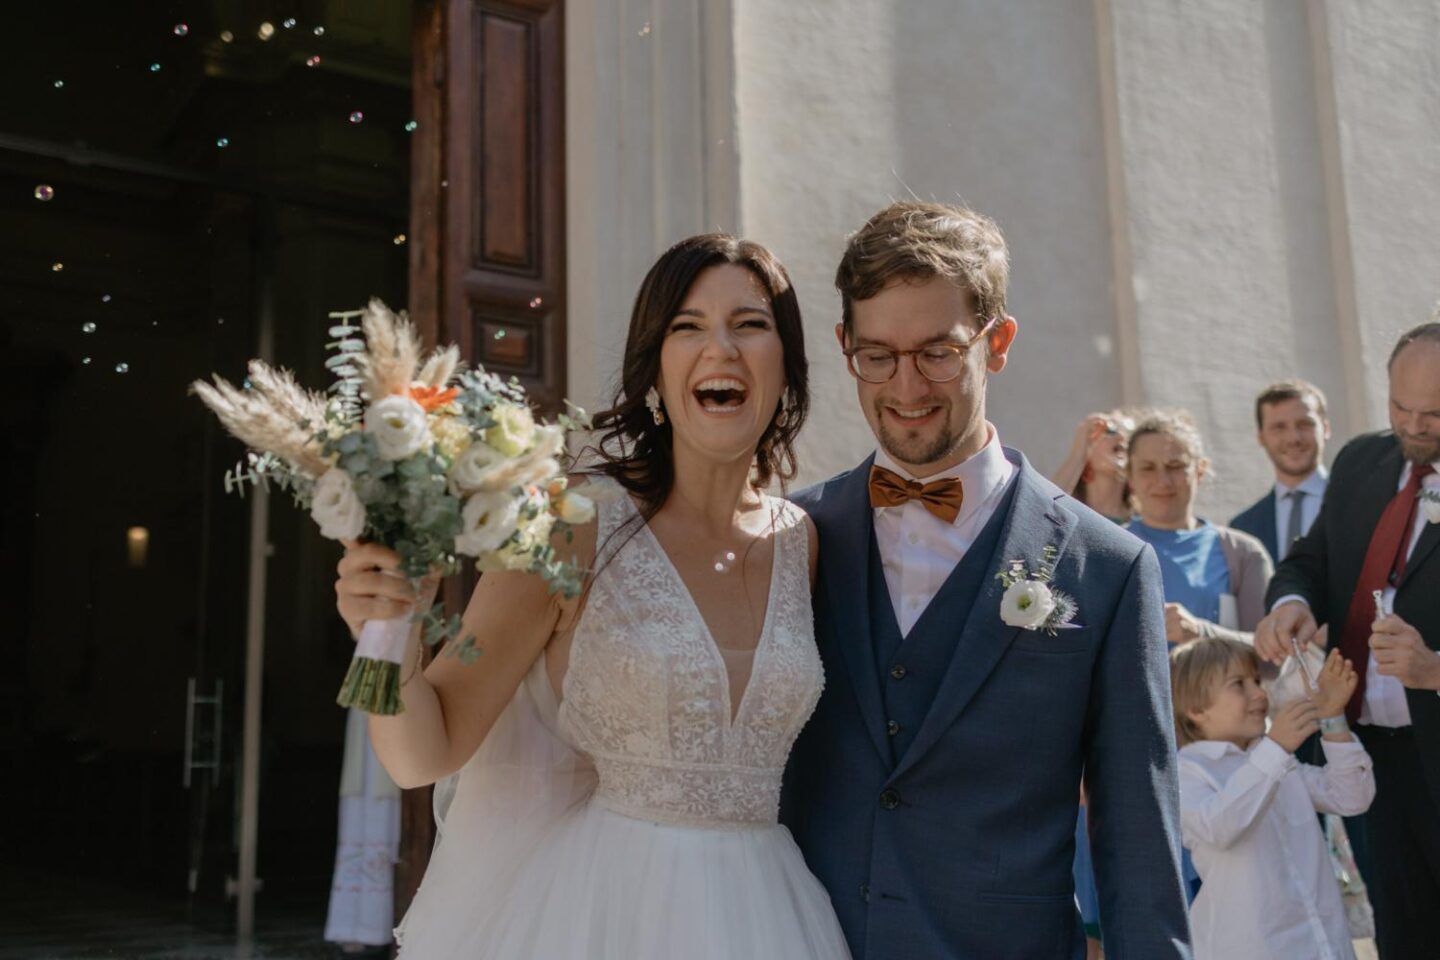 An Italian Country Chic Wedding With Retro Vibes